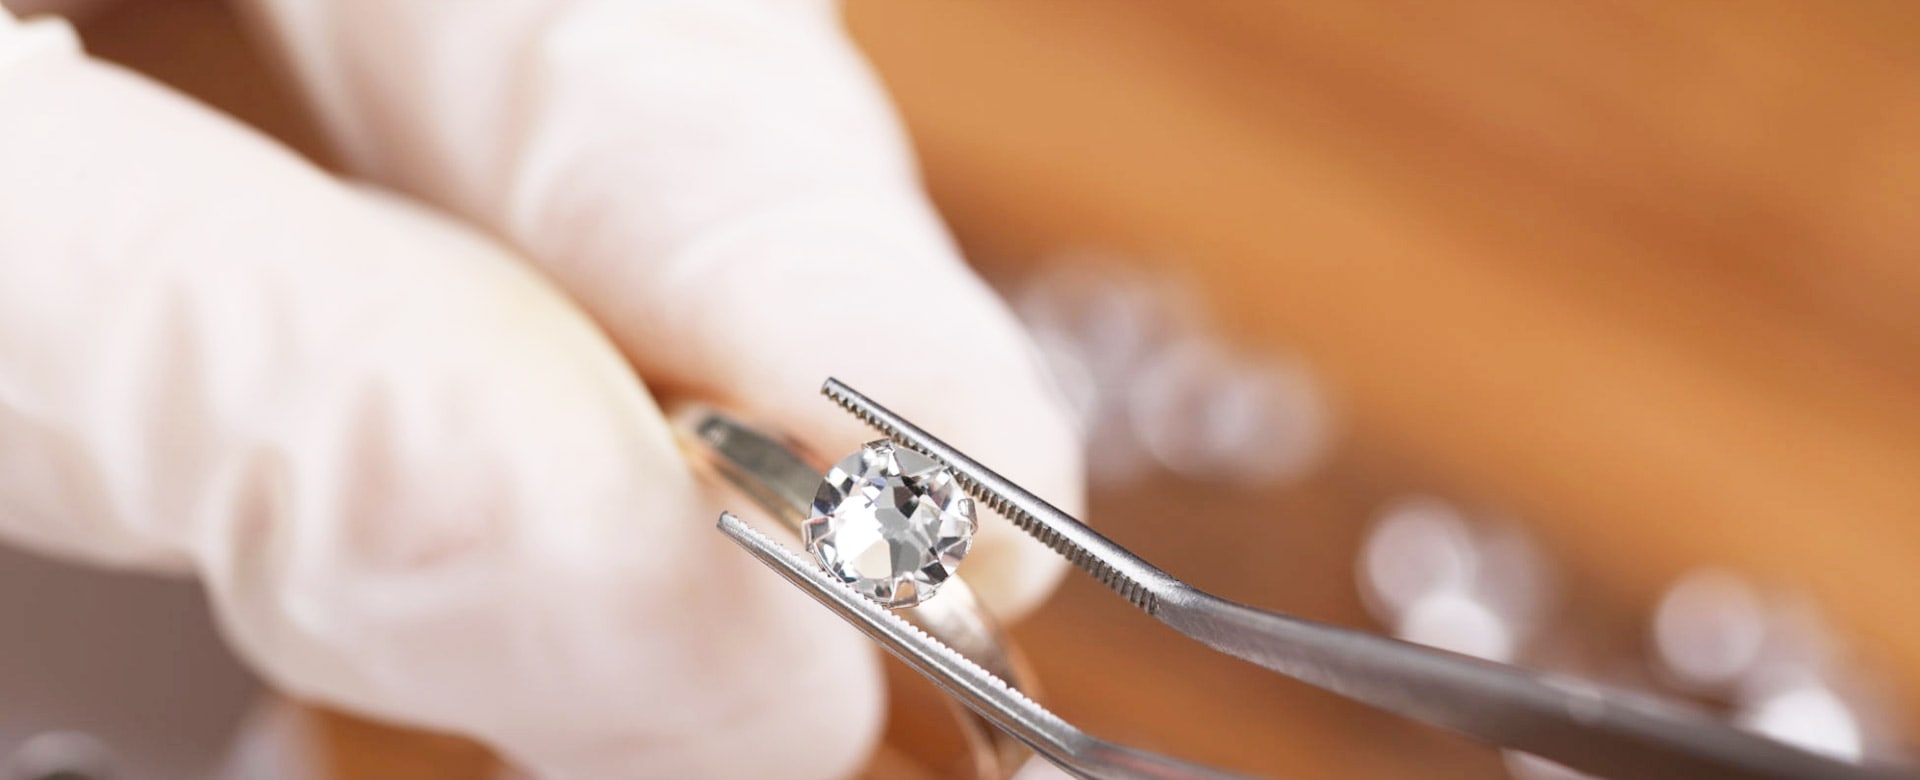 Care and Cleaning Tips for Diamonds 1